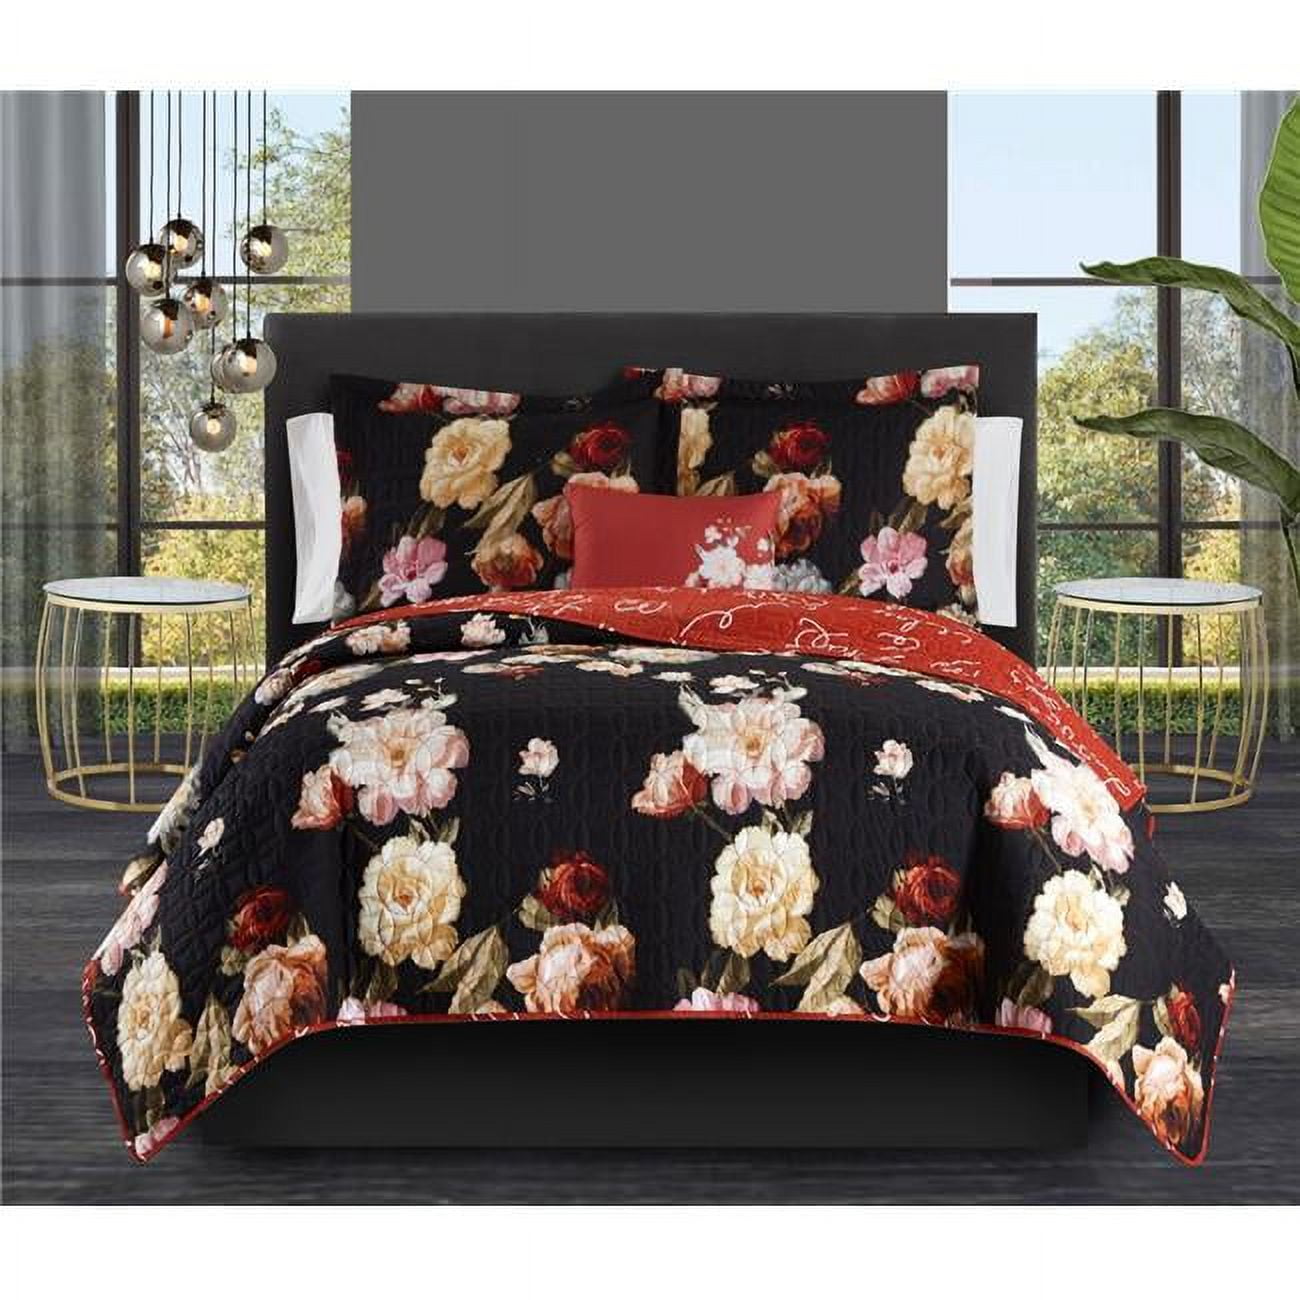 Picture of Chic Home BQS16577-BIB-US Eulalia 8 Piece Reversible Quilt Set for Floral Print Cursive Script Design Bed in a Bag - Sheet Set Decorative Pillow Shams Included&#44; King Size